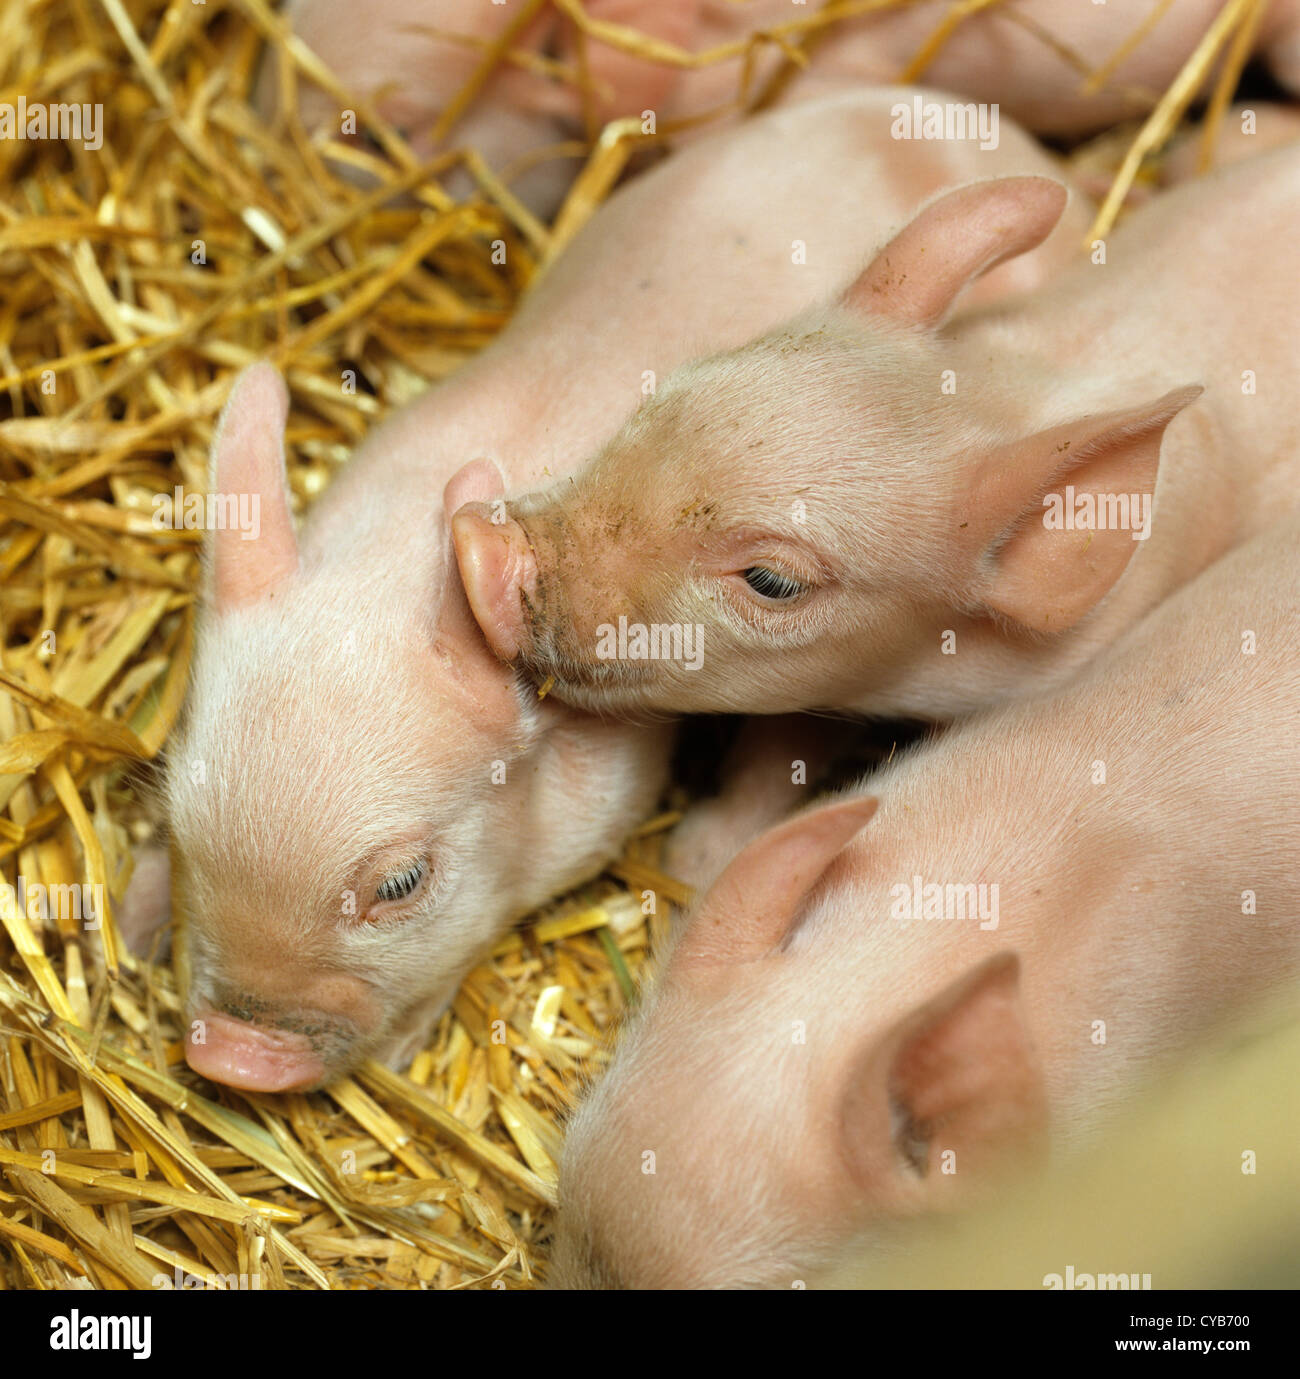 Young large white piglet weaners in pen on straw with some sleeping, Hampshire Stock Photo